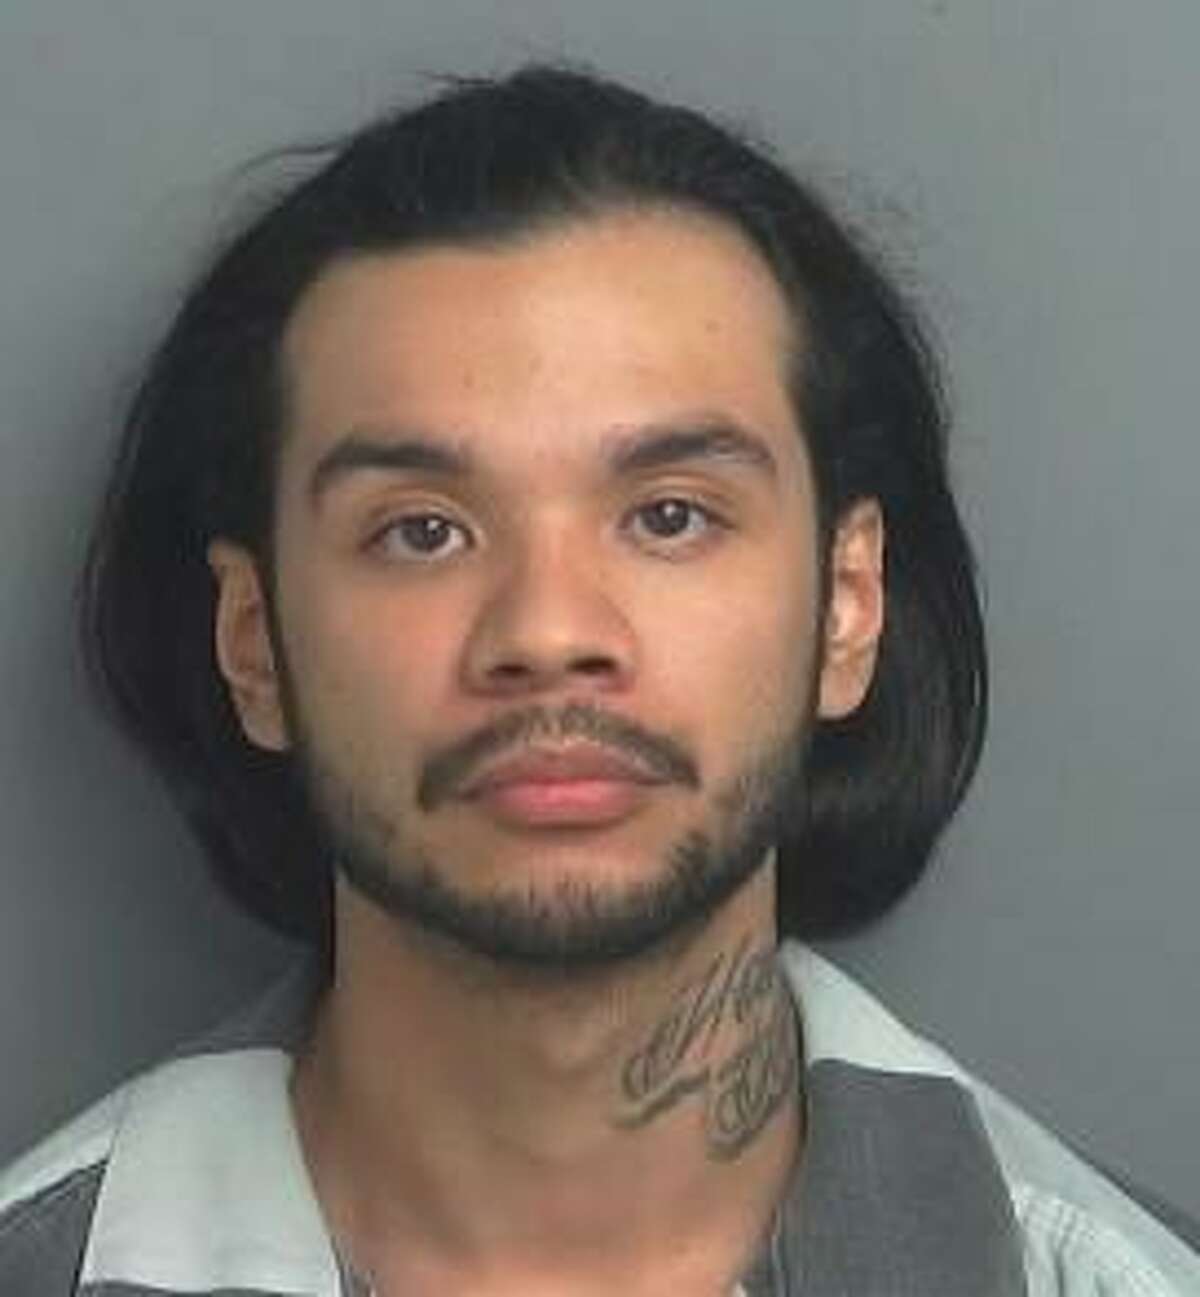 Richard Alex Tamez, 26, of Houston, was arrested Nov. 27 for allegedly soliciting a minor online.